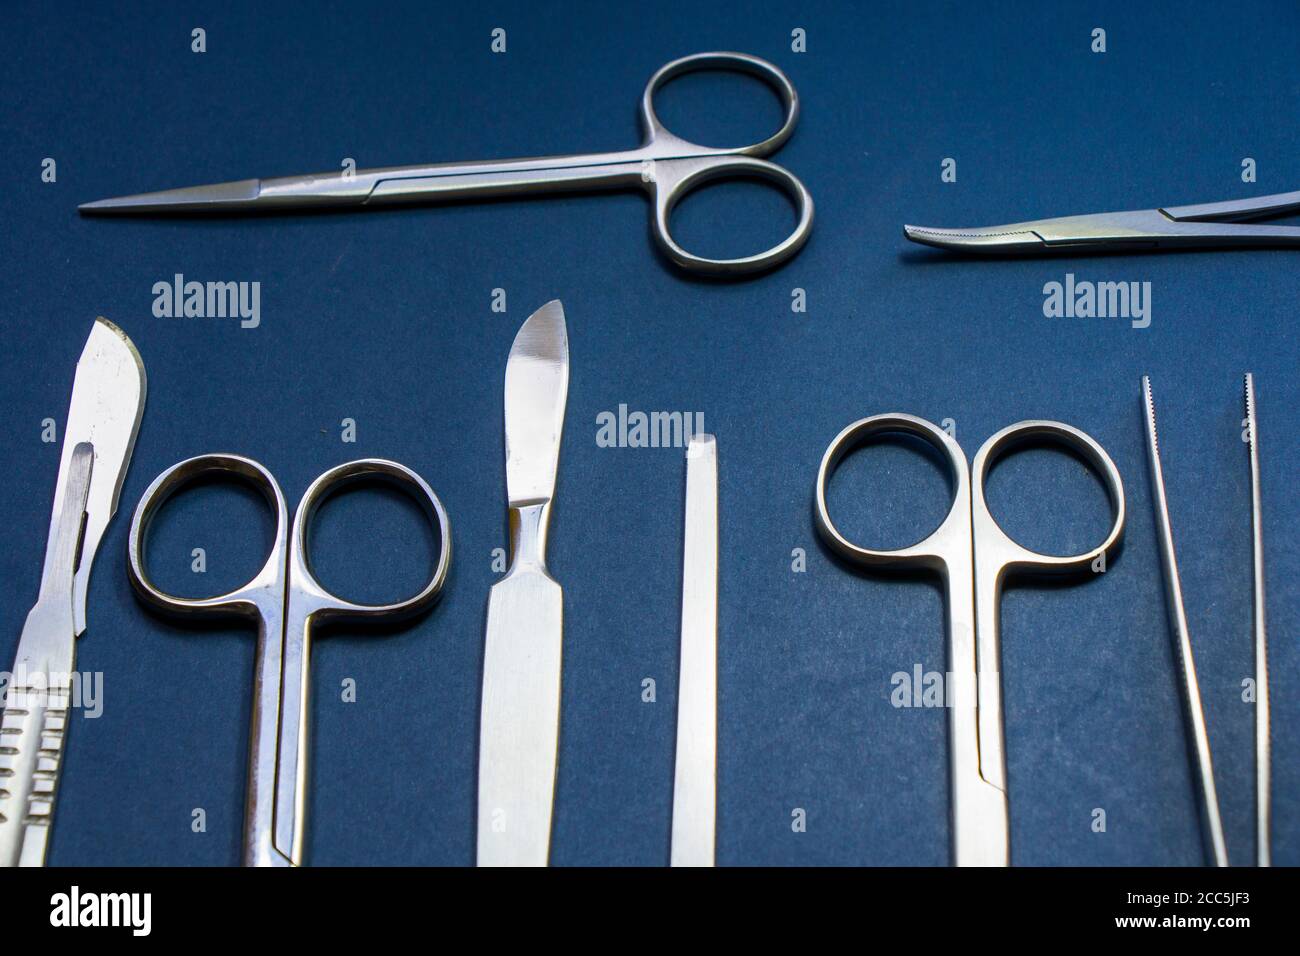 Dissection Kit - Premium Quality Stainless Steel Tools for Medical Students  of Anatomy, Biology, Veterinary, Marine Biology with Scalpel Blades Stock  Photo - Alamy